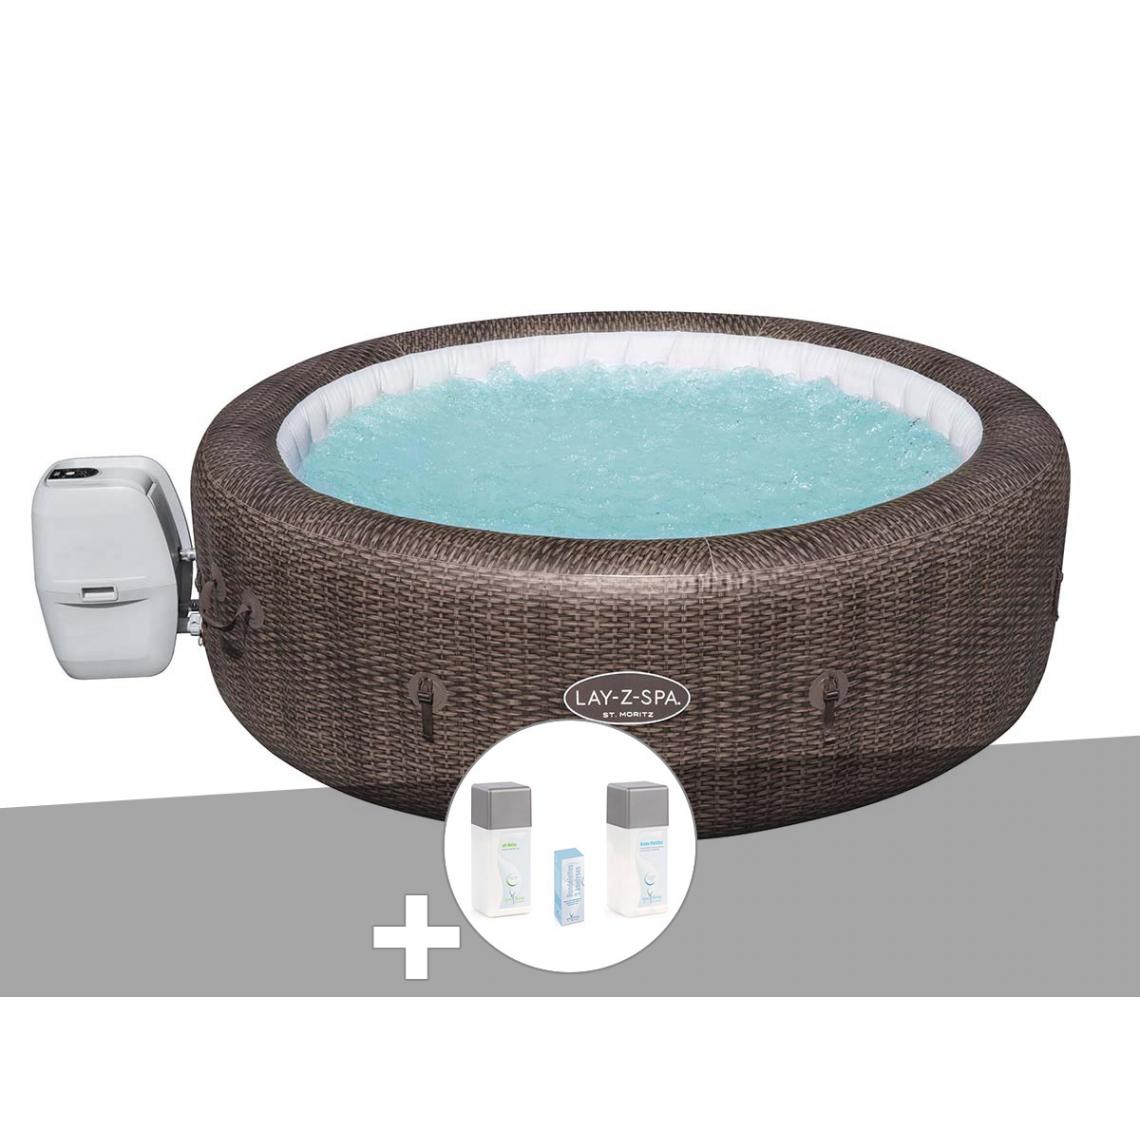 Bestway - Kit spa gonflable Bestway Lay-Z-Spa St Moritz rond Airjet 5/7 places + Kit traitement brome - Spa gonflable